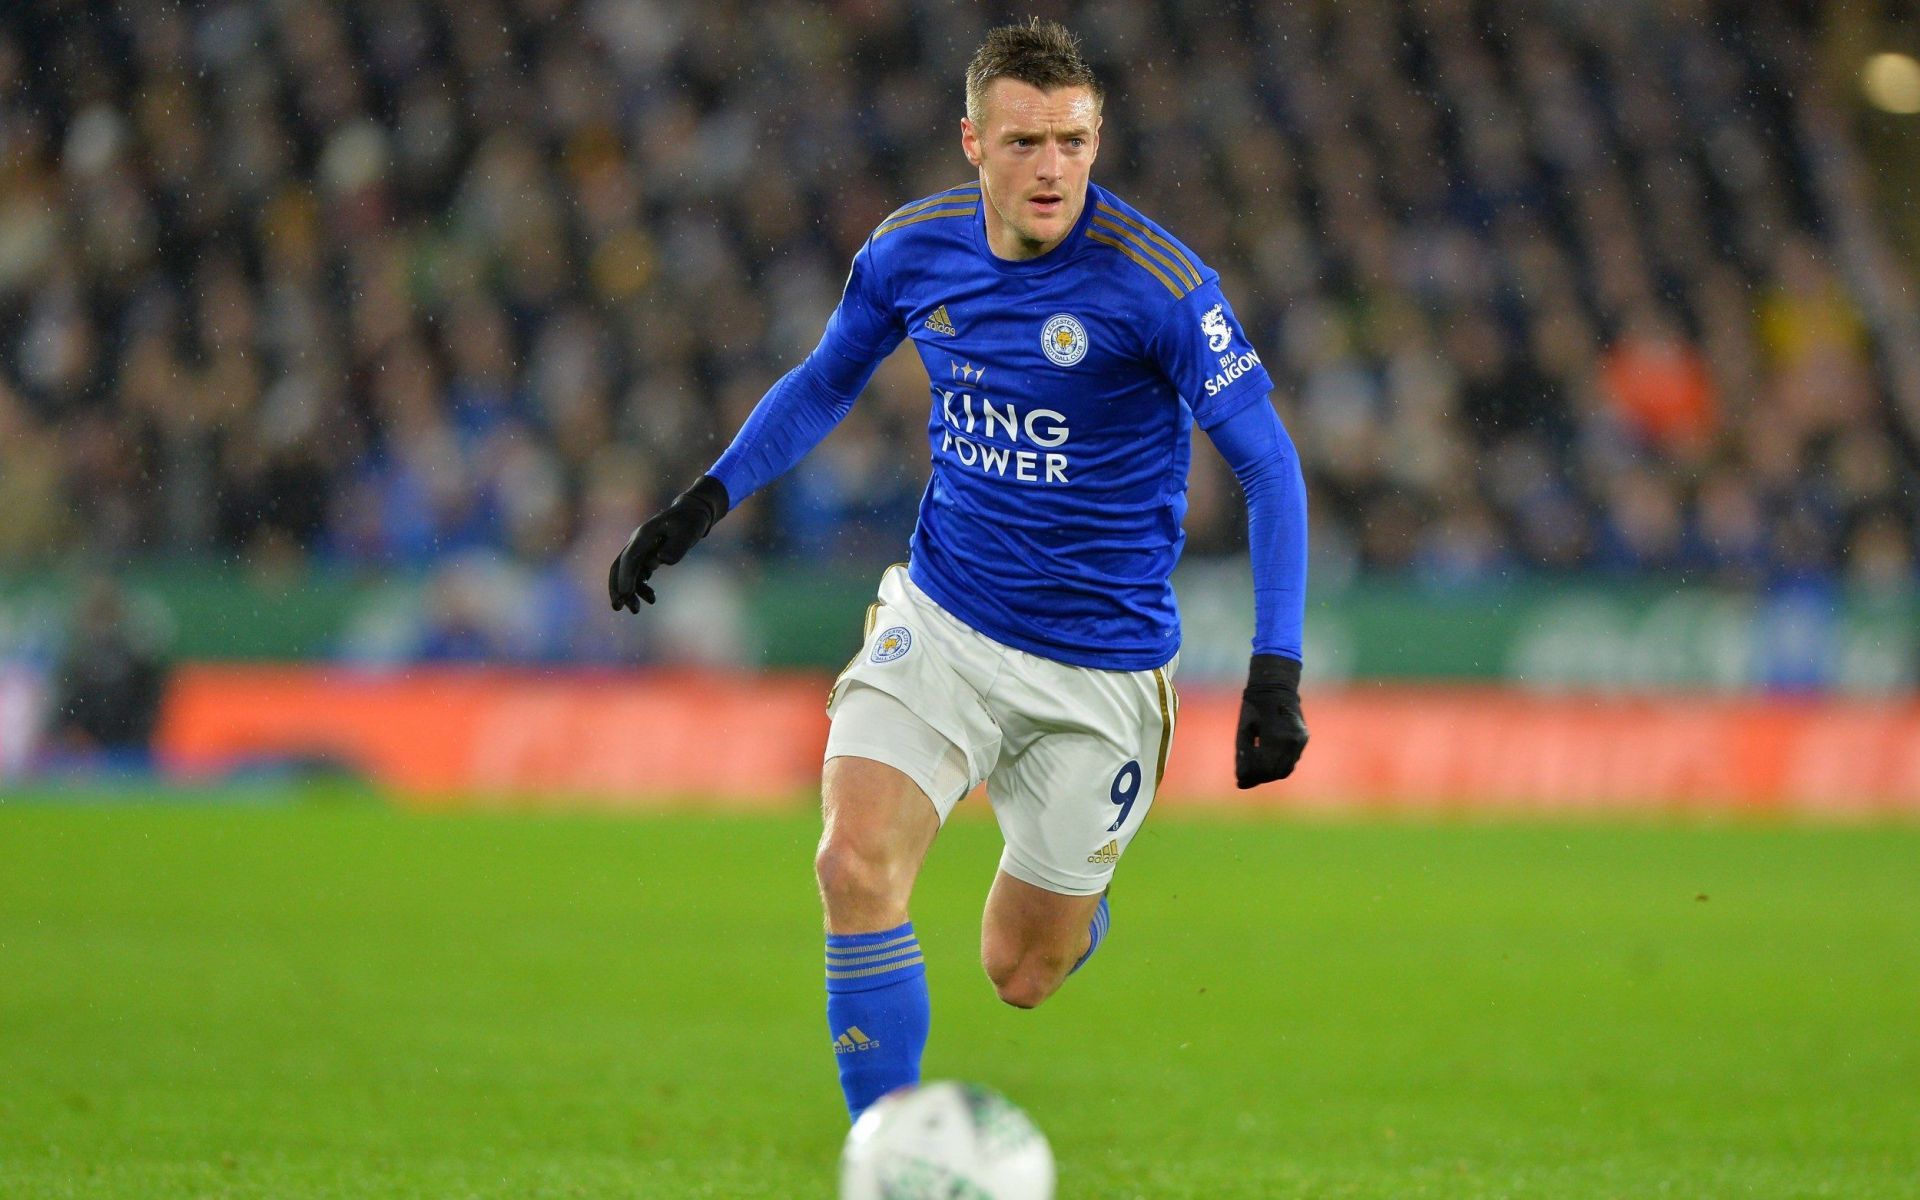 Leicester Front-man Jamie Vardy (Image via The Telegraph)